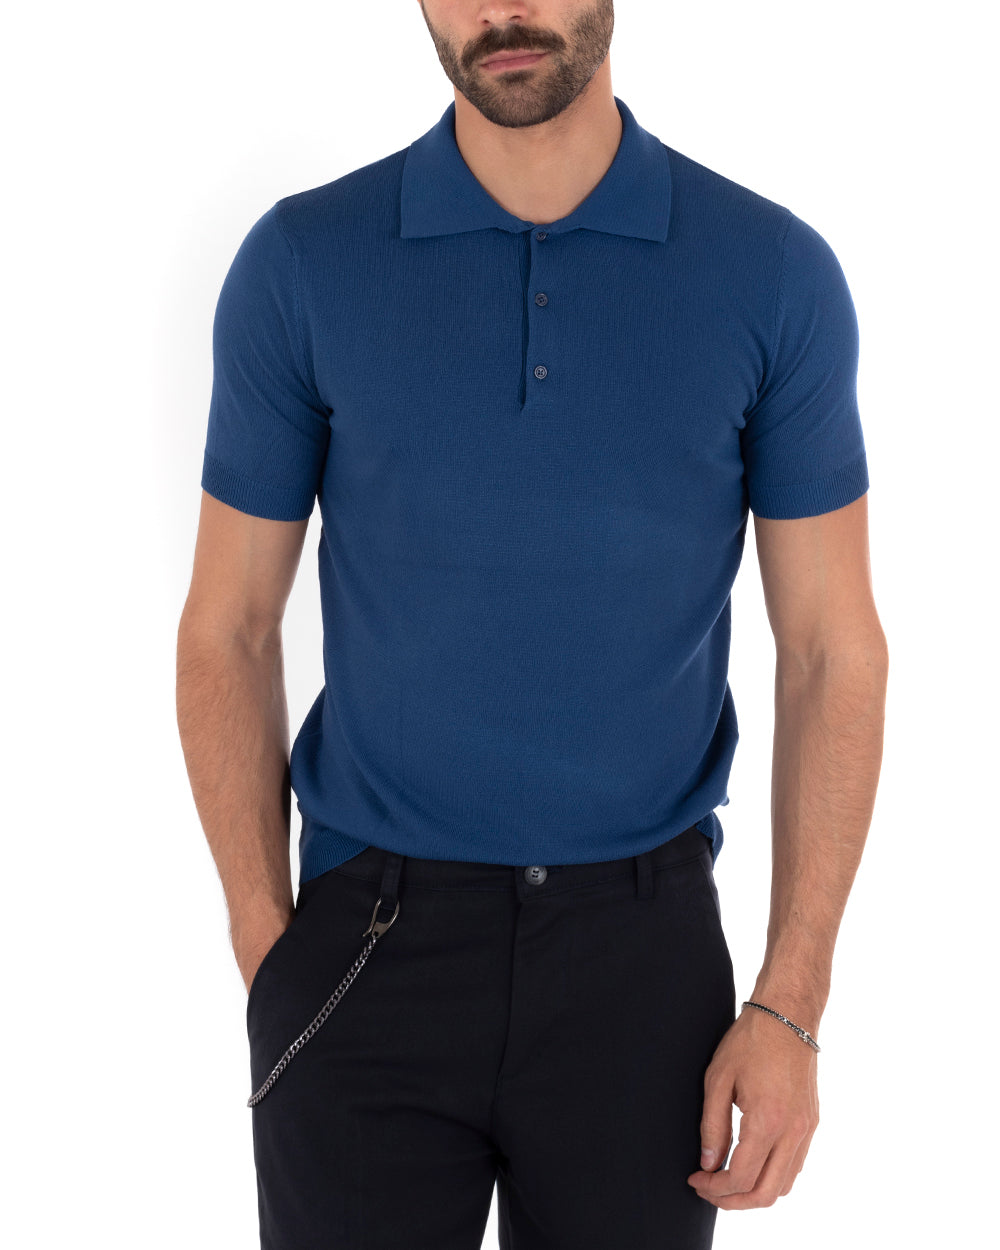 Men's Polo T-Shirt Short Sleeve Solid Color Royal Blue Neckline Buttons Thread Casual GIOSAL